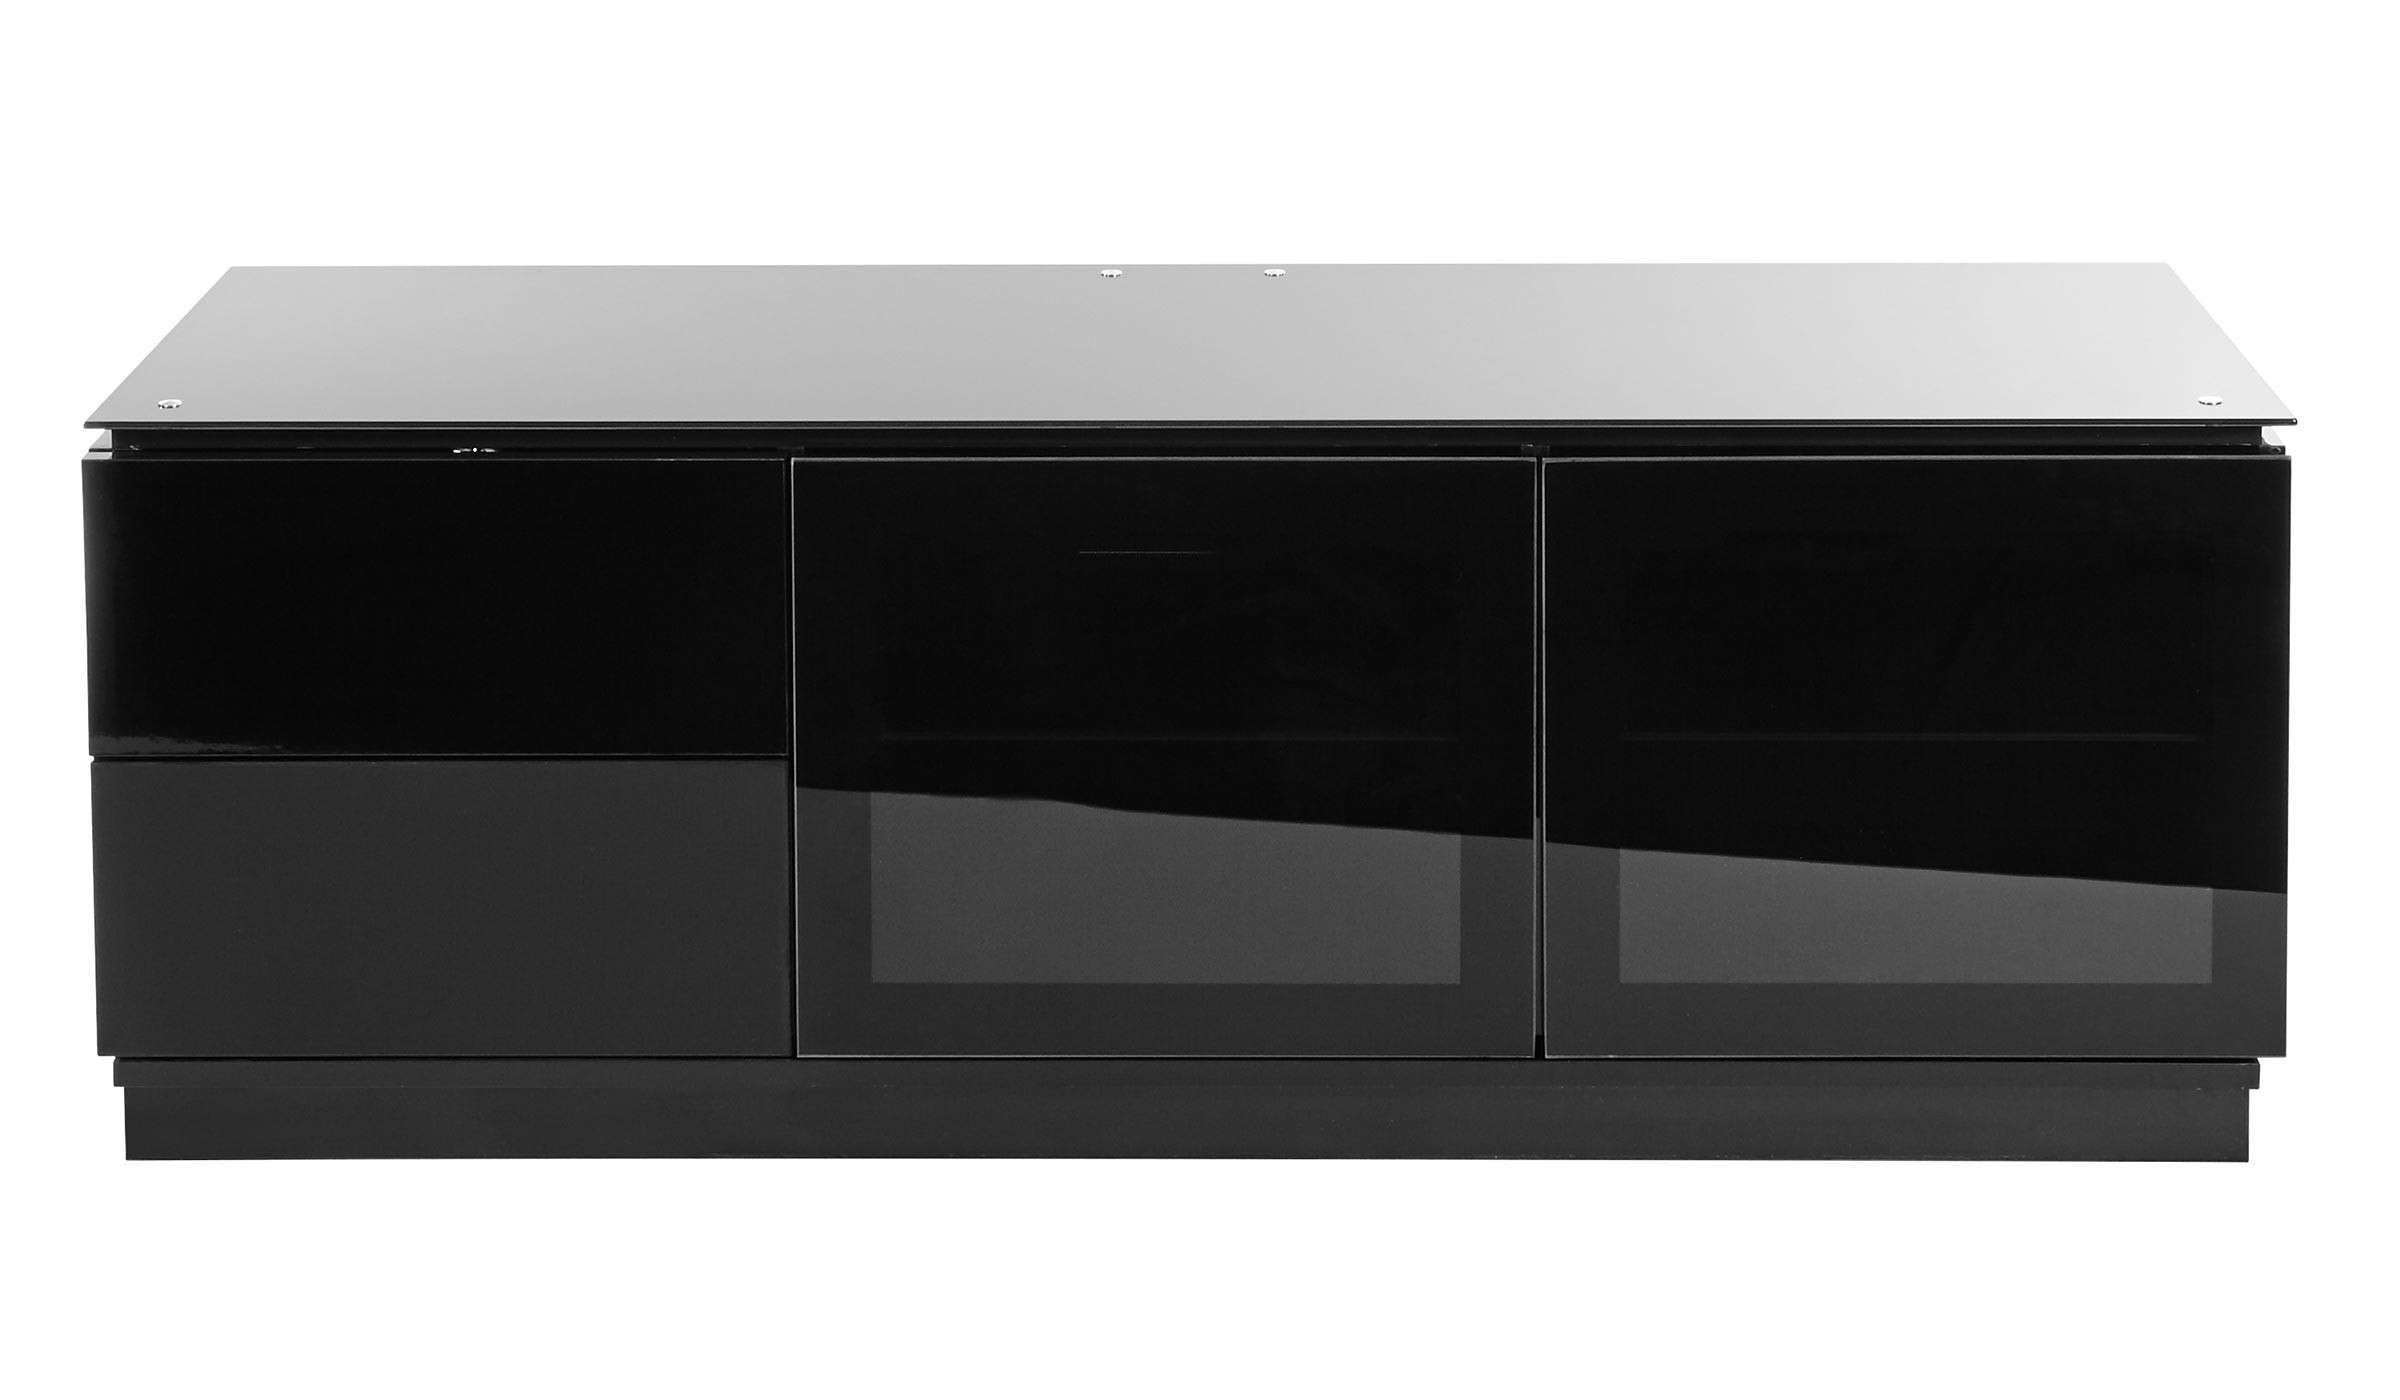 Black Gloss Tv Cabinet Up To 65" Tv | Casino Mmt C1500b With Regard To Black Tv Cabinets With Drawers (View 15 of 20)